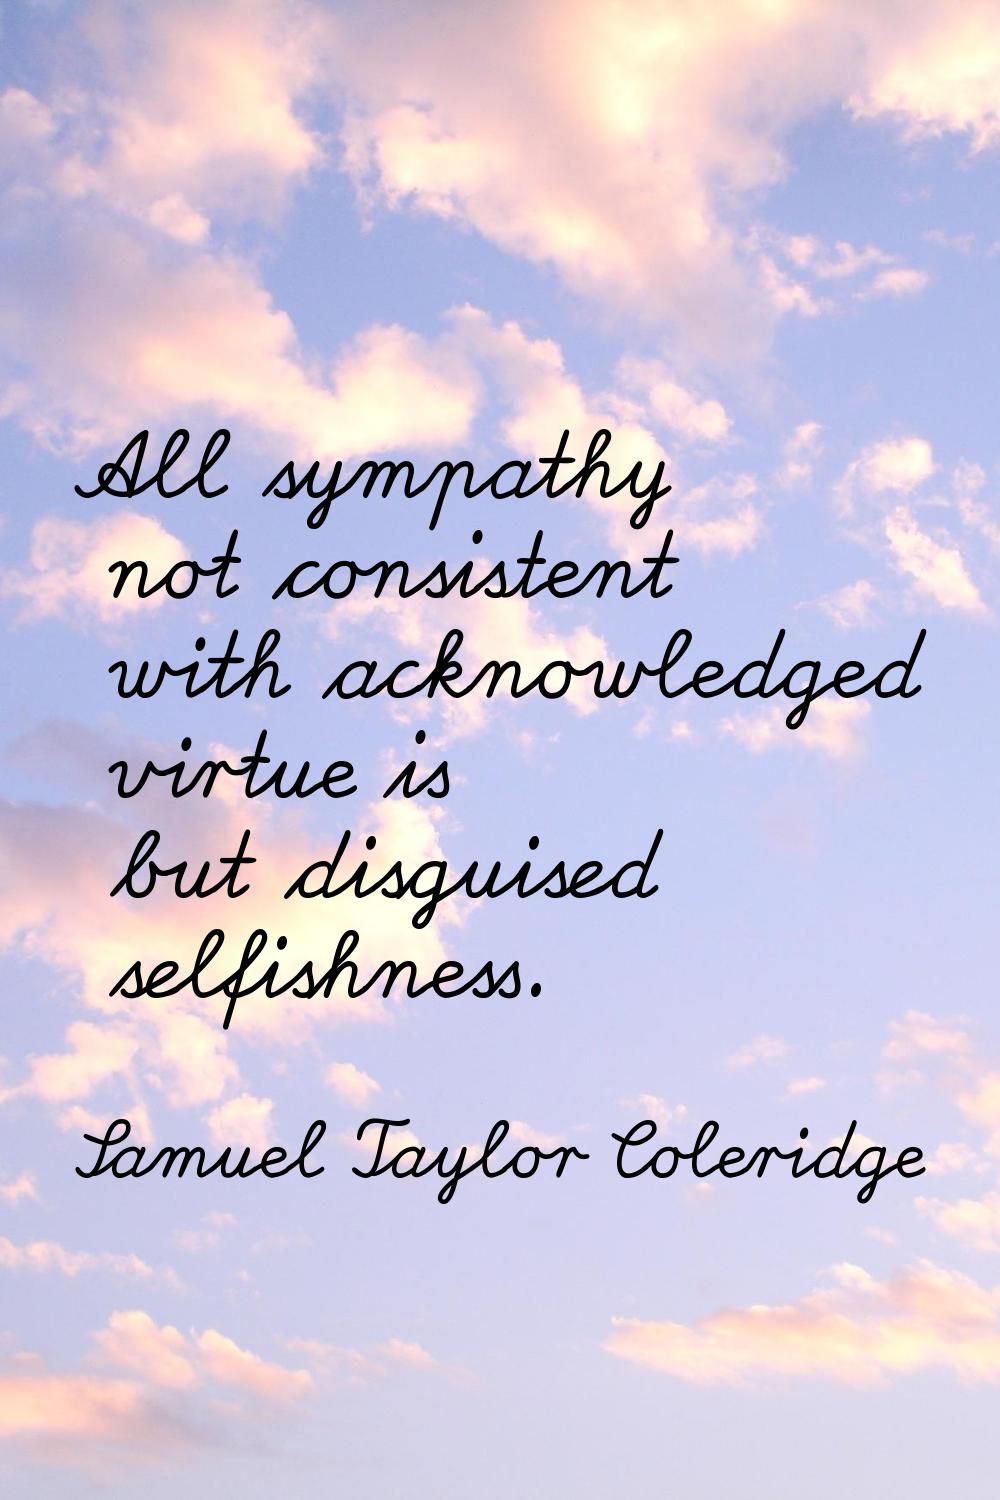 All sympathy not consistent with acknowledged virtue is but disguised selfishness.